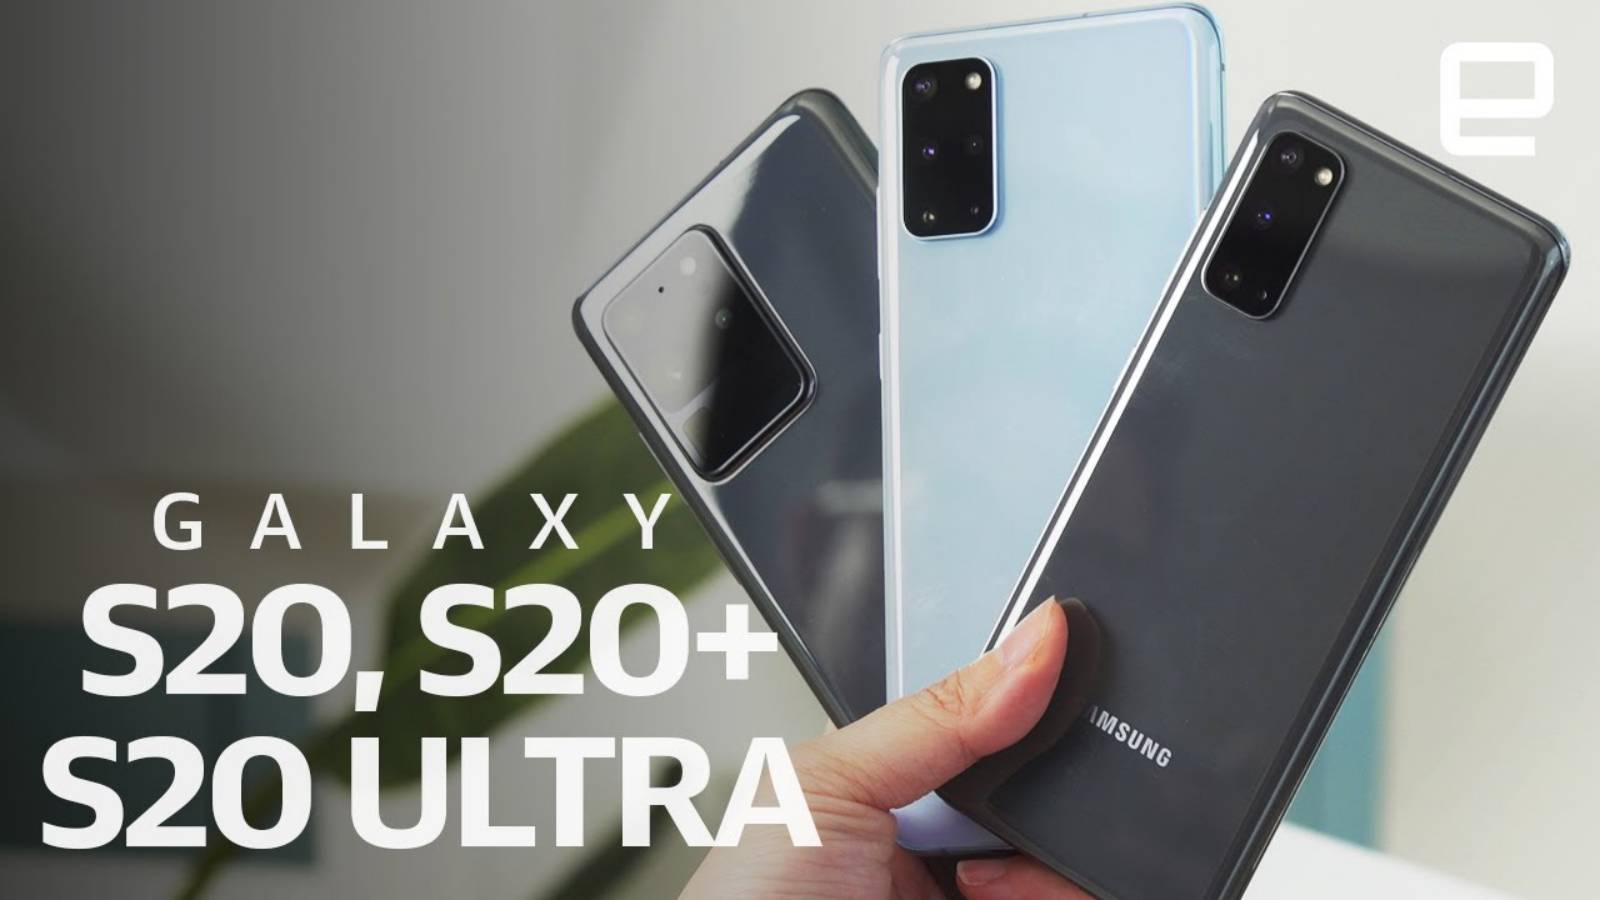 Samsung GALAXY S20 Ultra défectueux